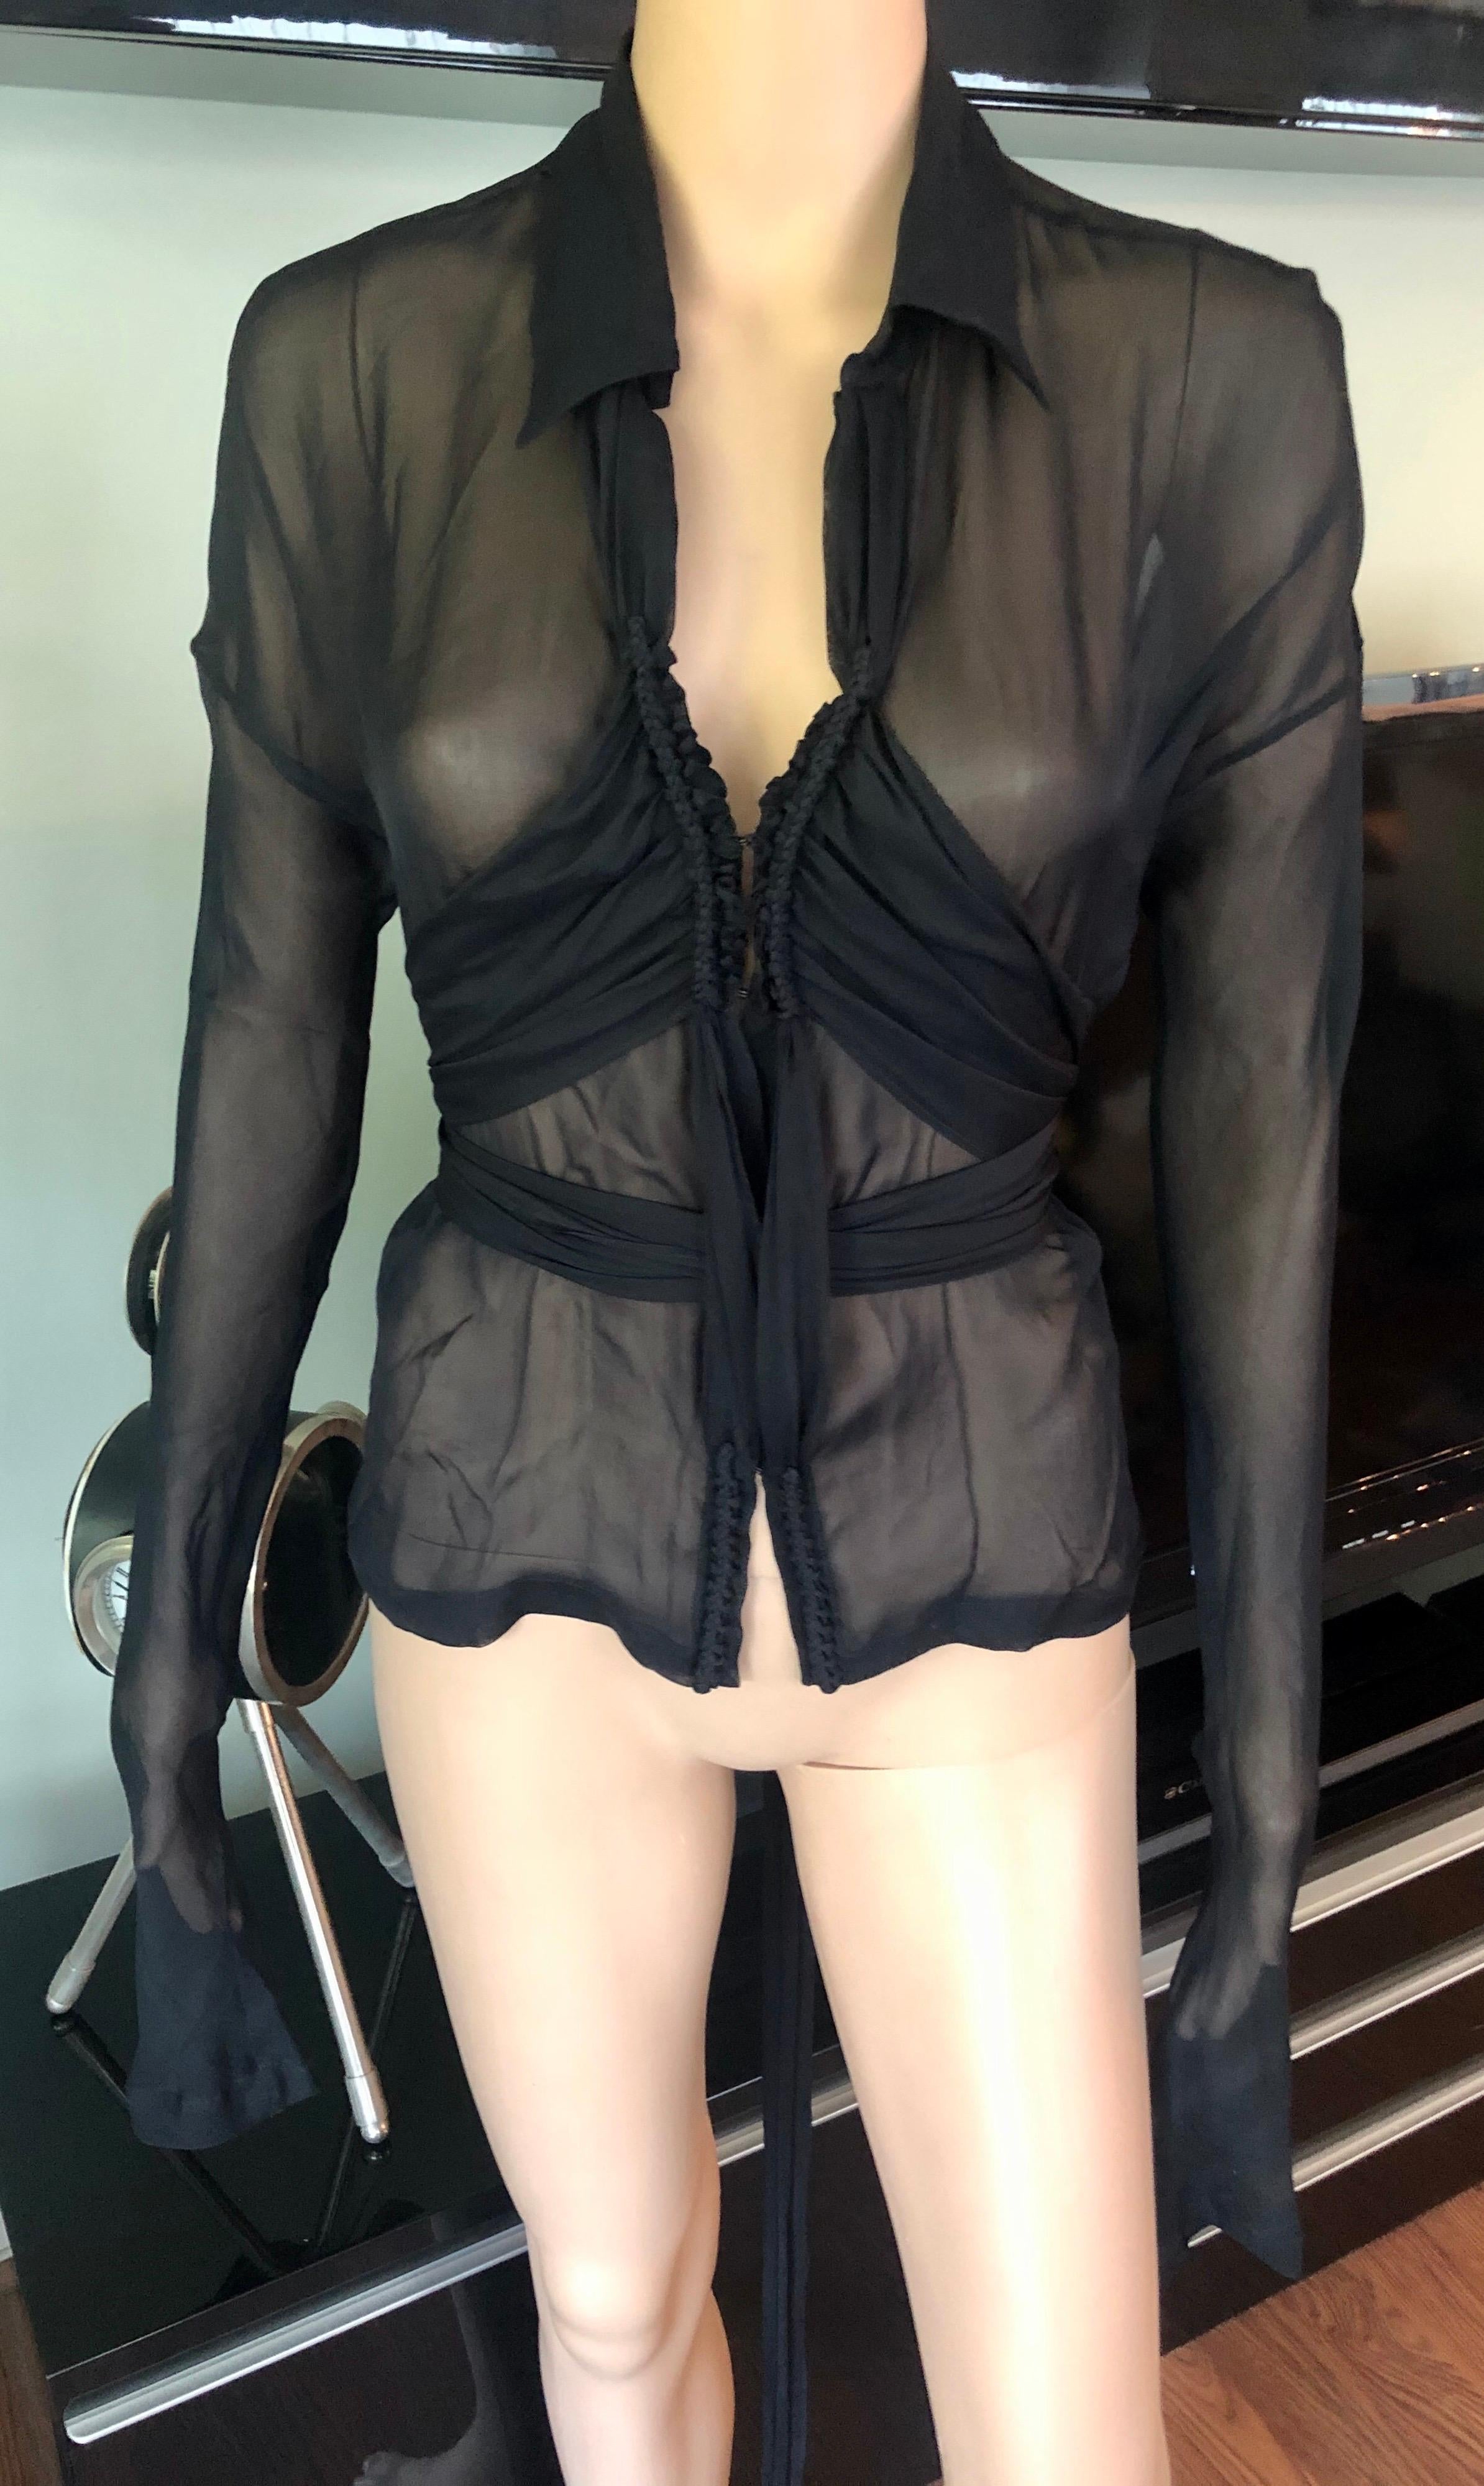 Tom Ford for Gucci F/W 2002 Silk Sheer Black Shirt Blouse Top IT 42

Gucci silk sheer black top with V-neck, long sleeves and hook-and-eye closures at front featuring tie accent.
